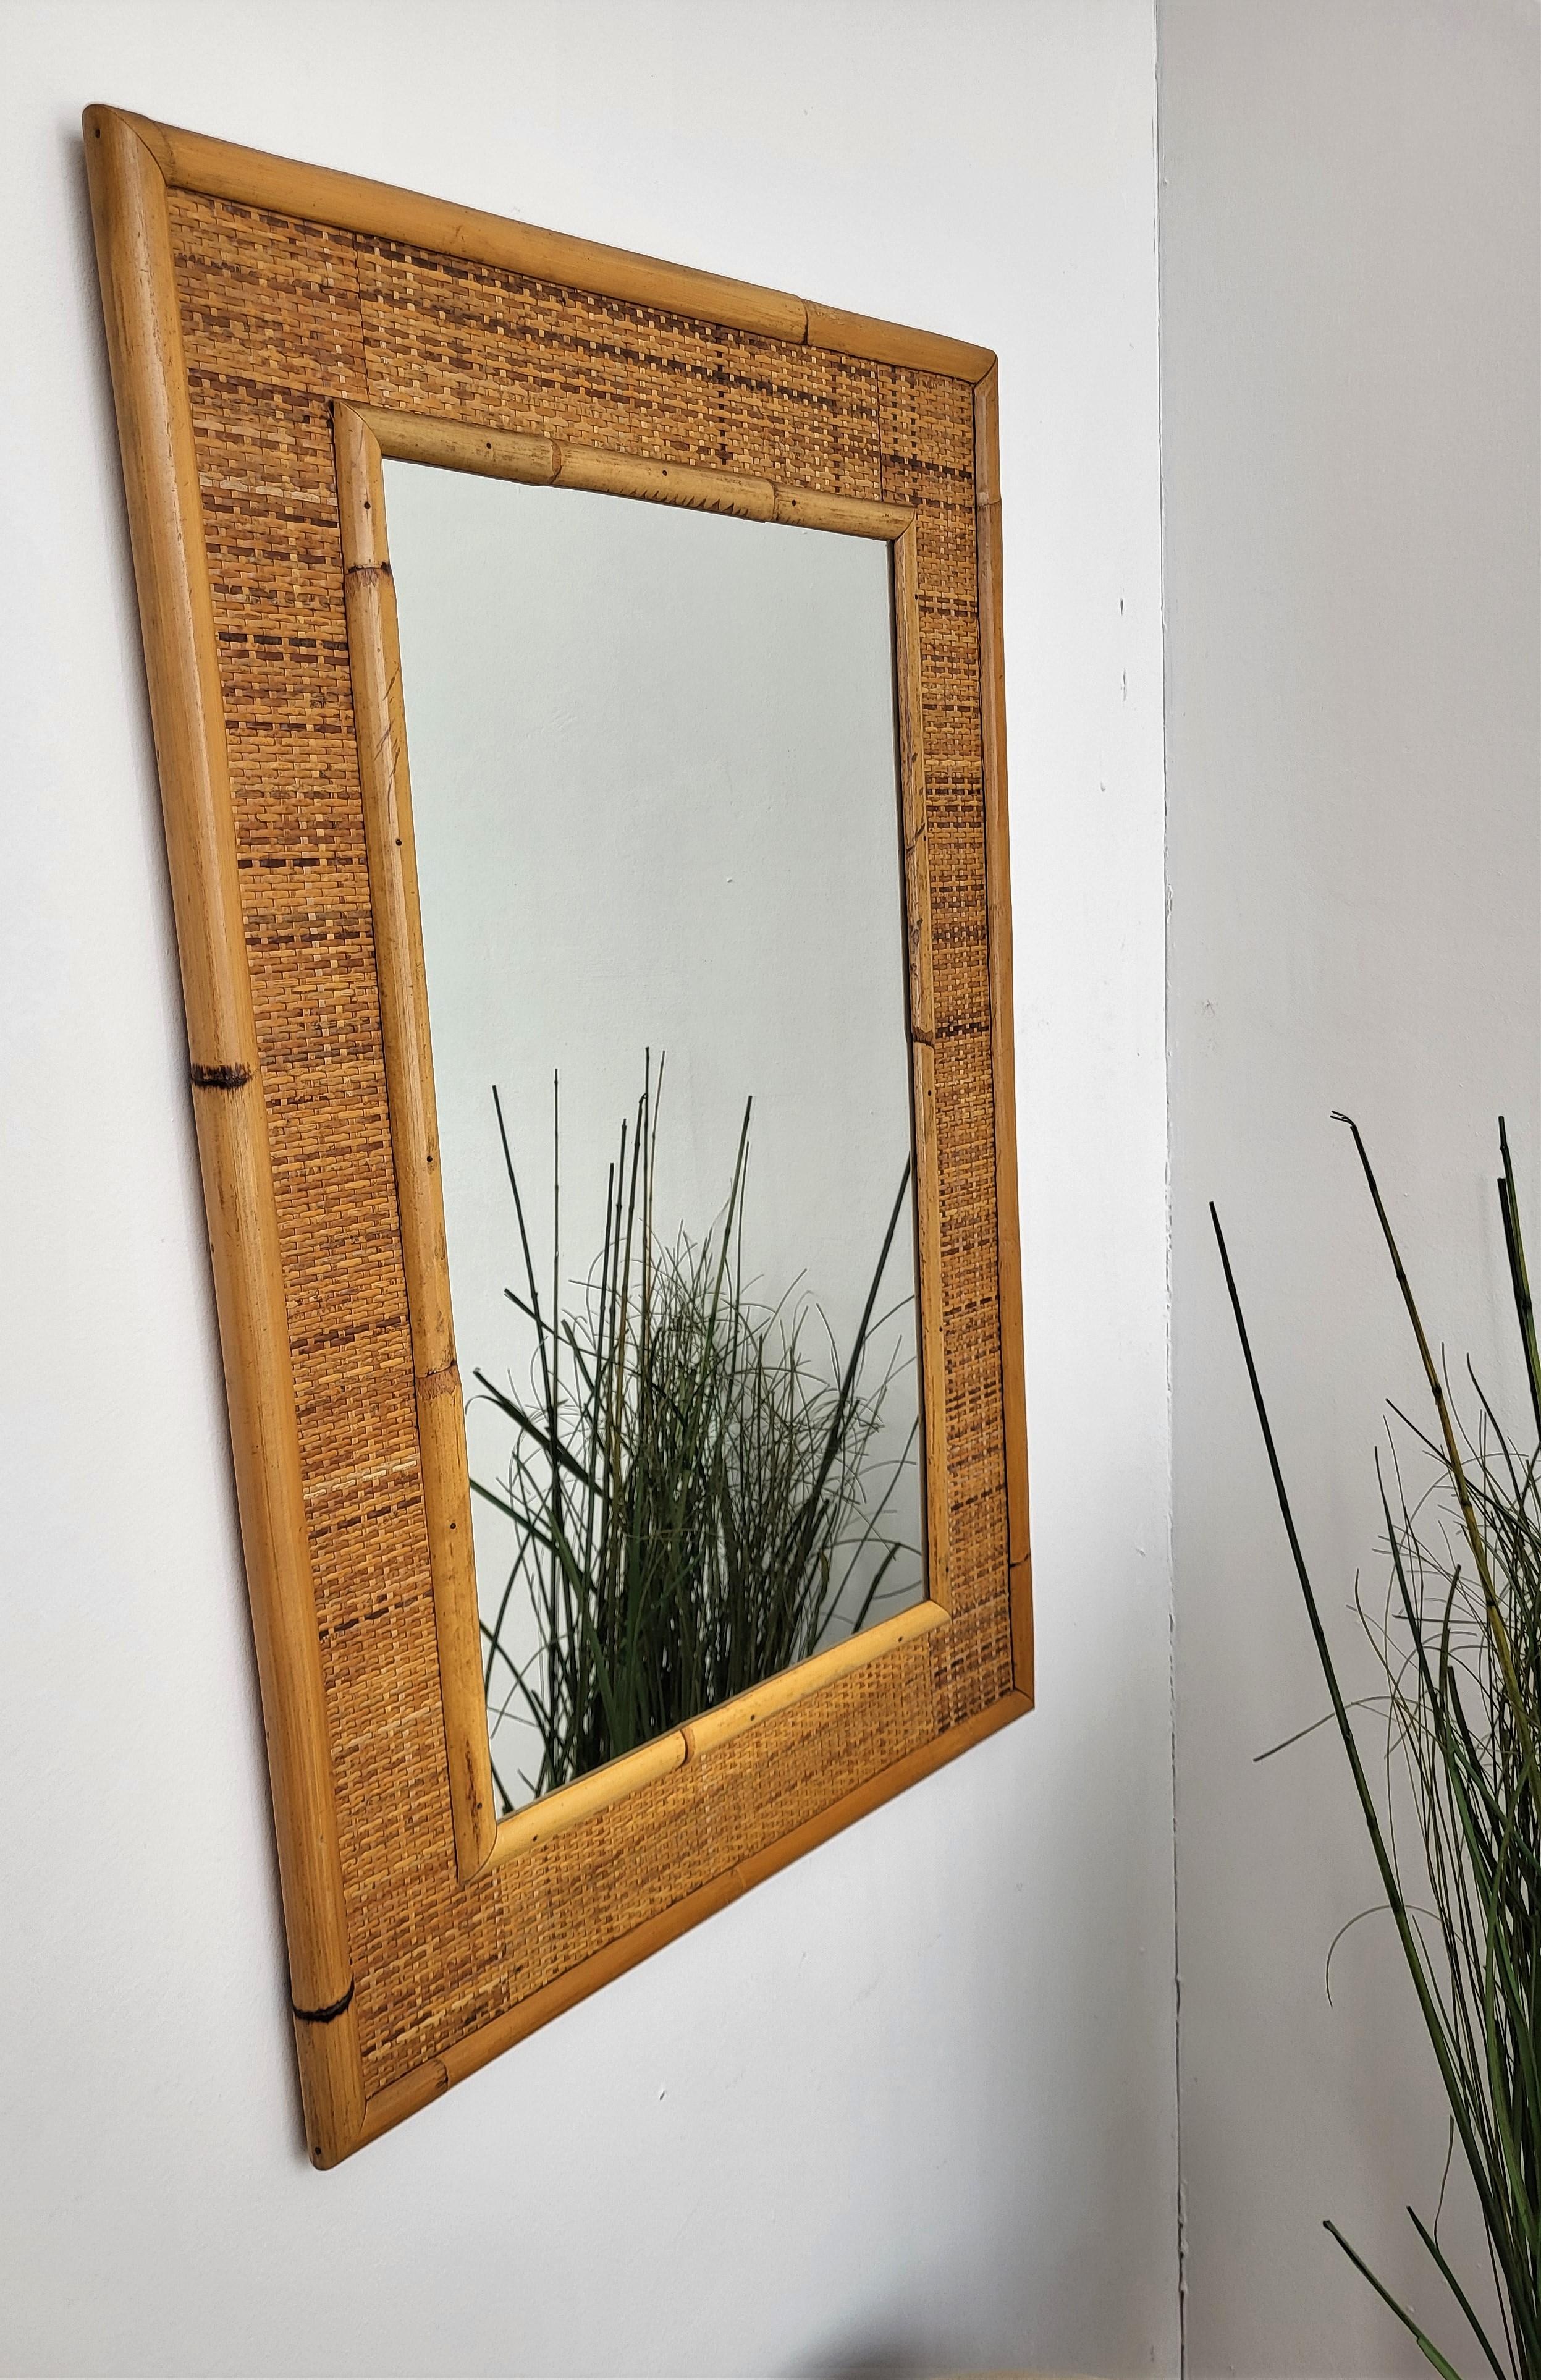 French Provincial 1970s Italian Dal Vera Bamboo Rattan Midcentury French Riviera Mirror For Sale